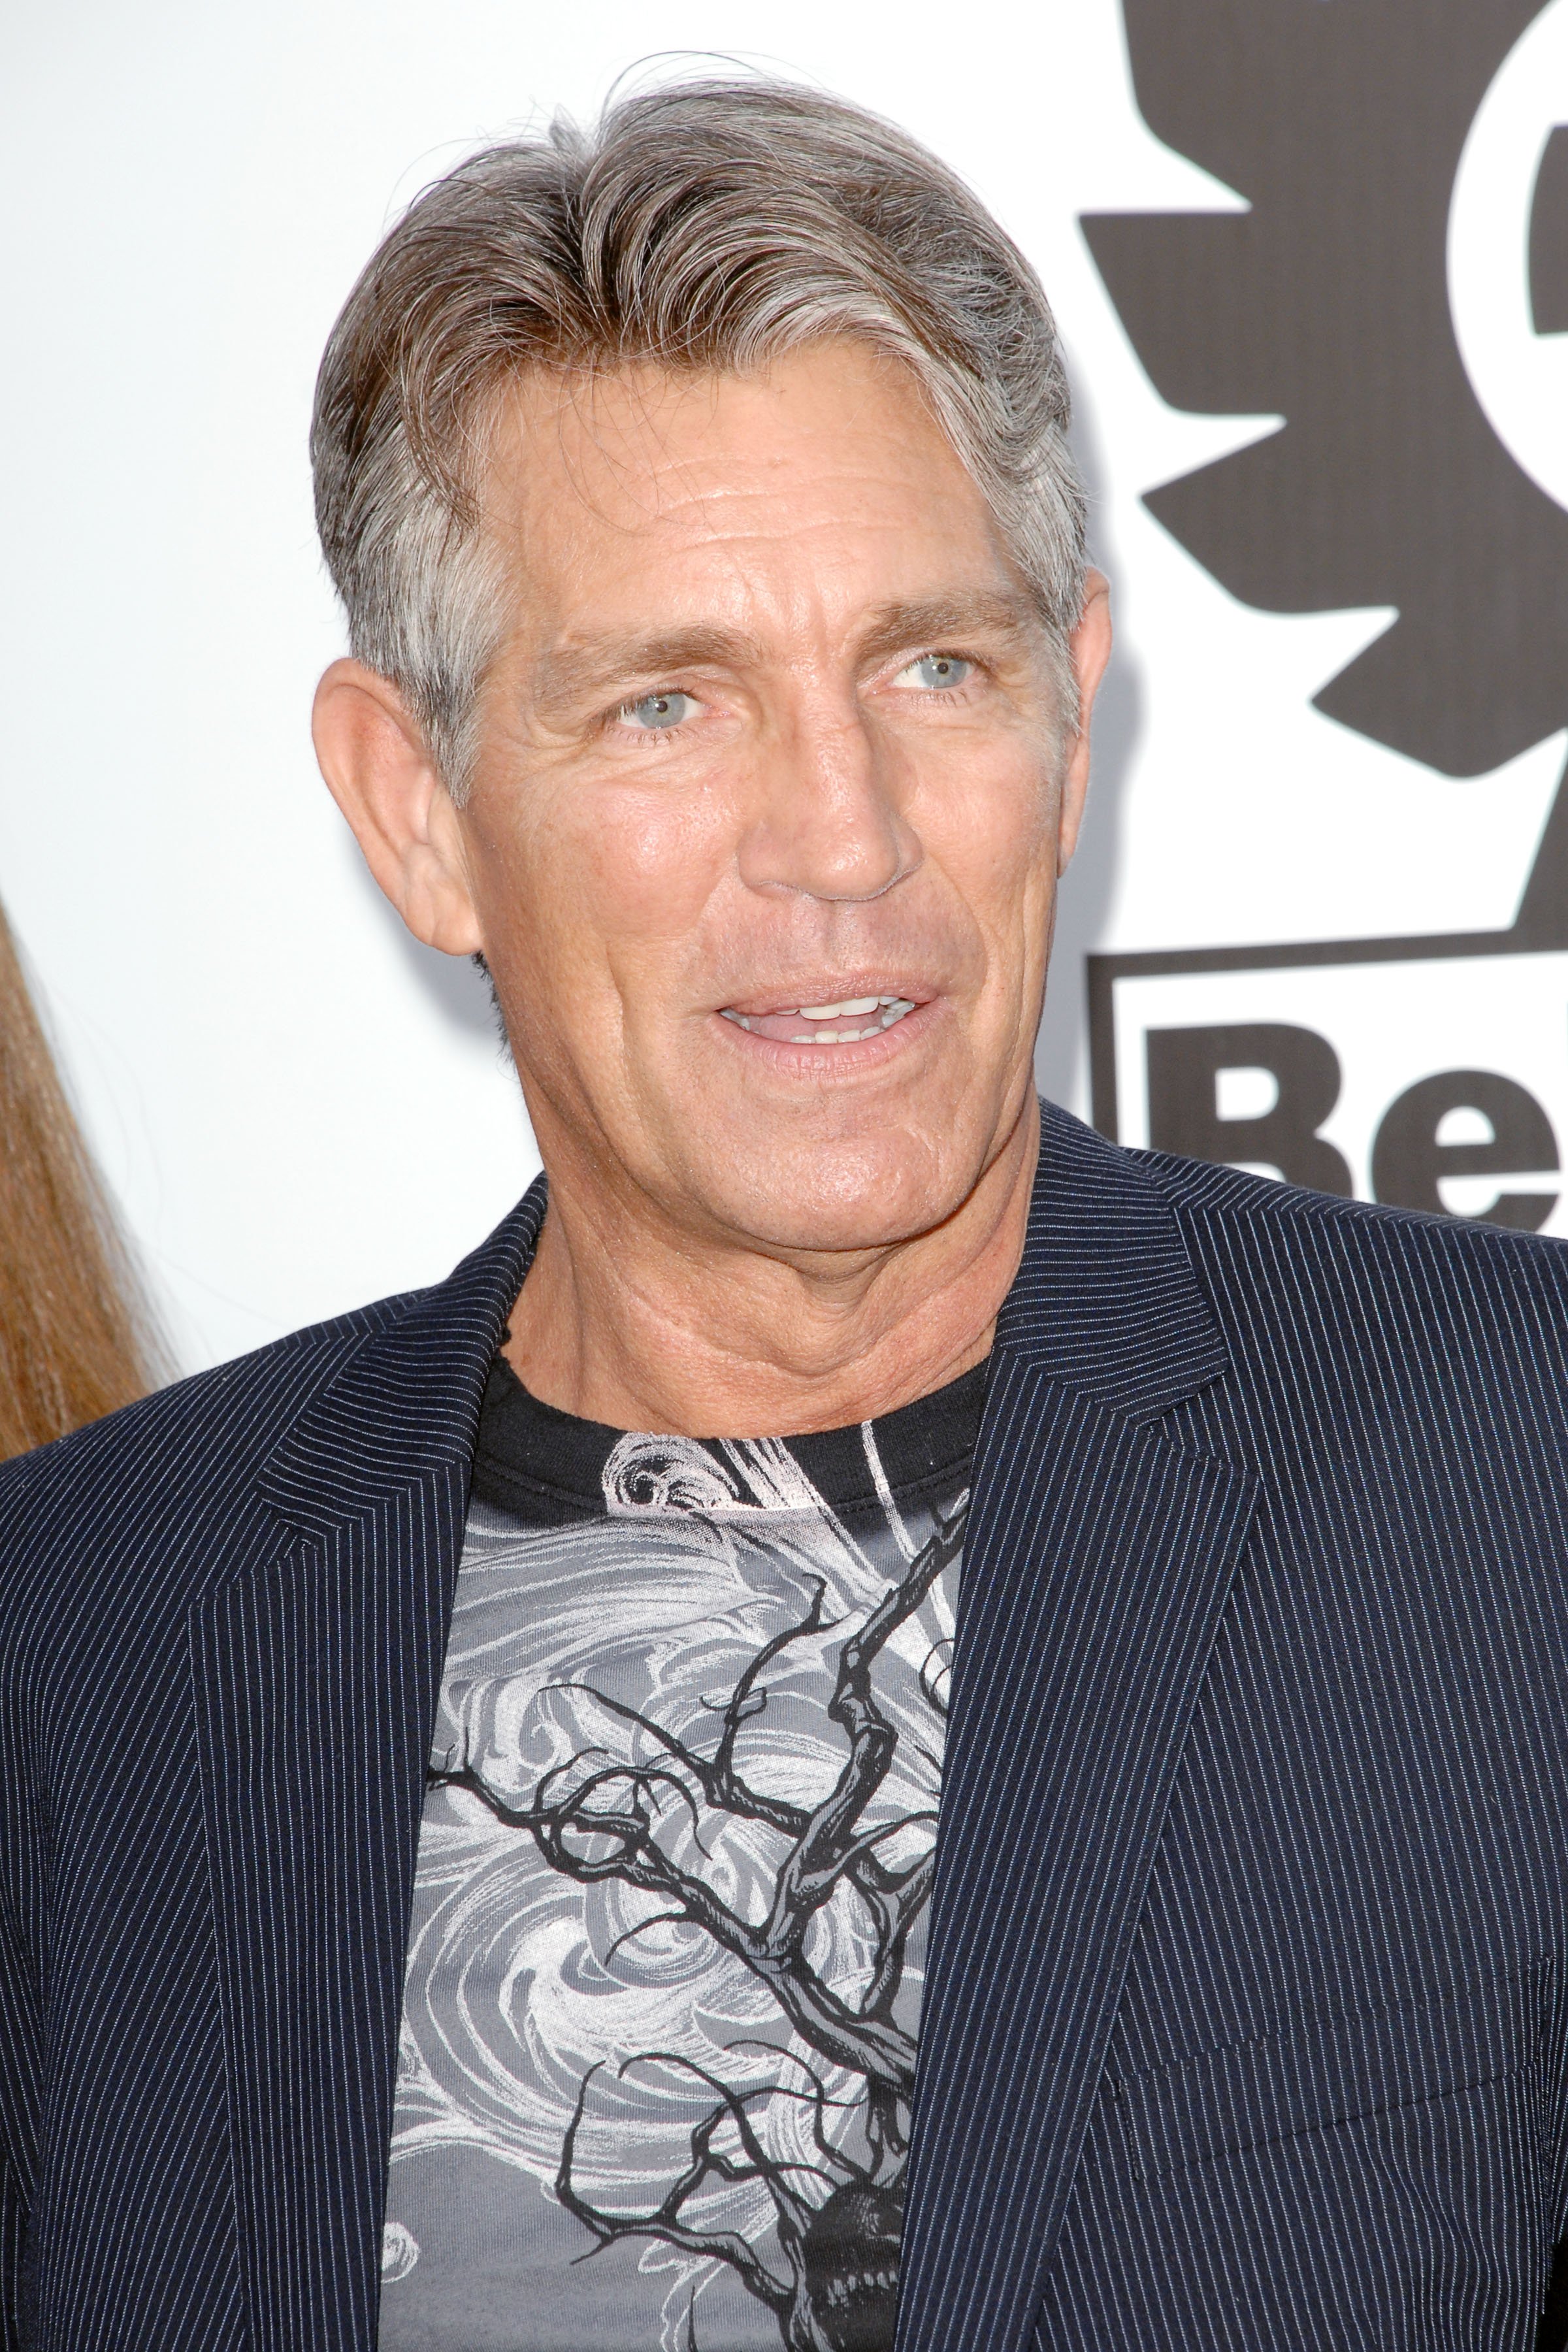 Eric Roberts attends Exclusive World Sneak Screening of THE EXPENDABLES at Grauman's Chinese Theatre on August 3, 2010 in Hollywood, California | Source: Getty Images